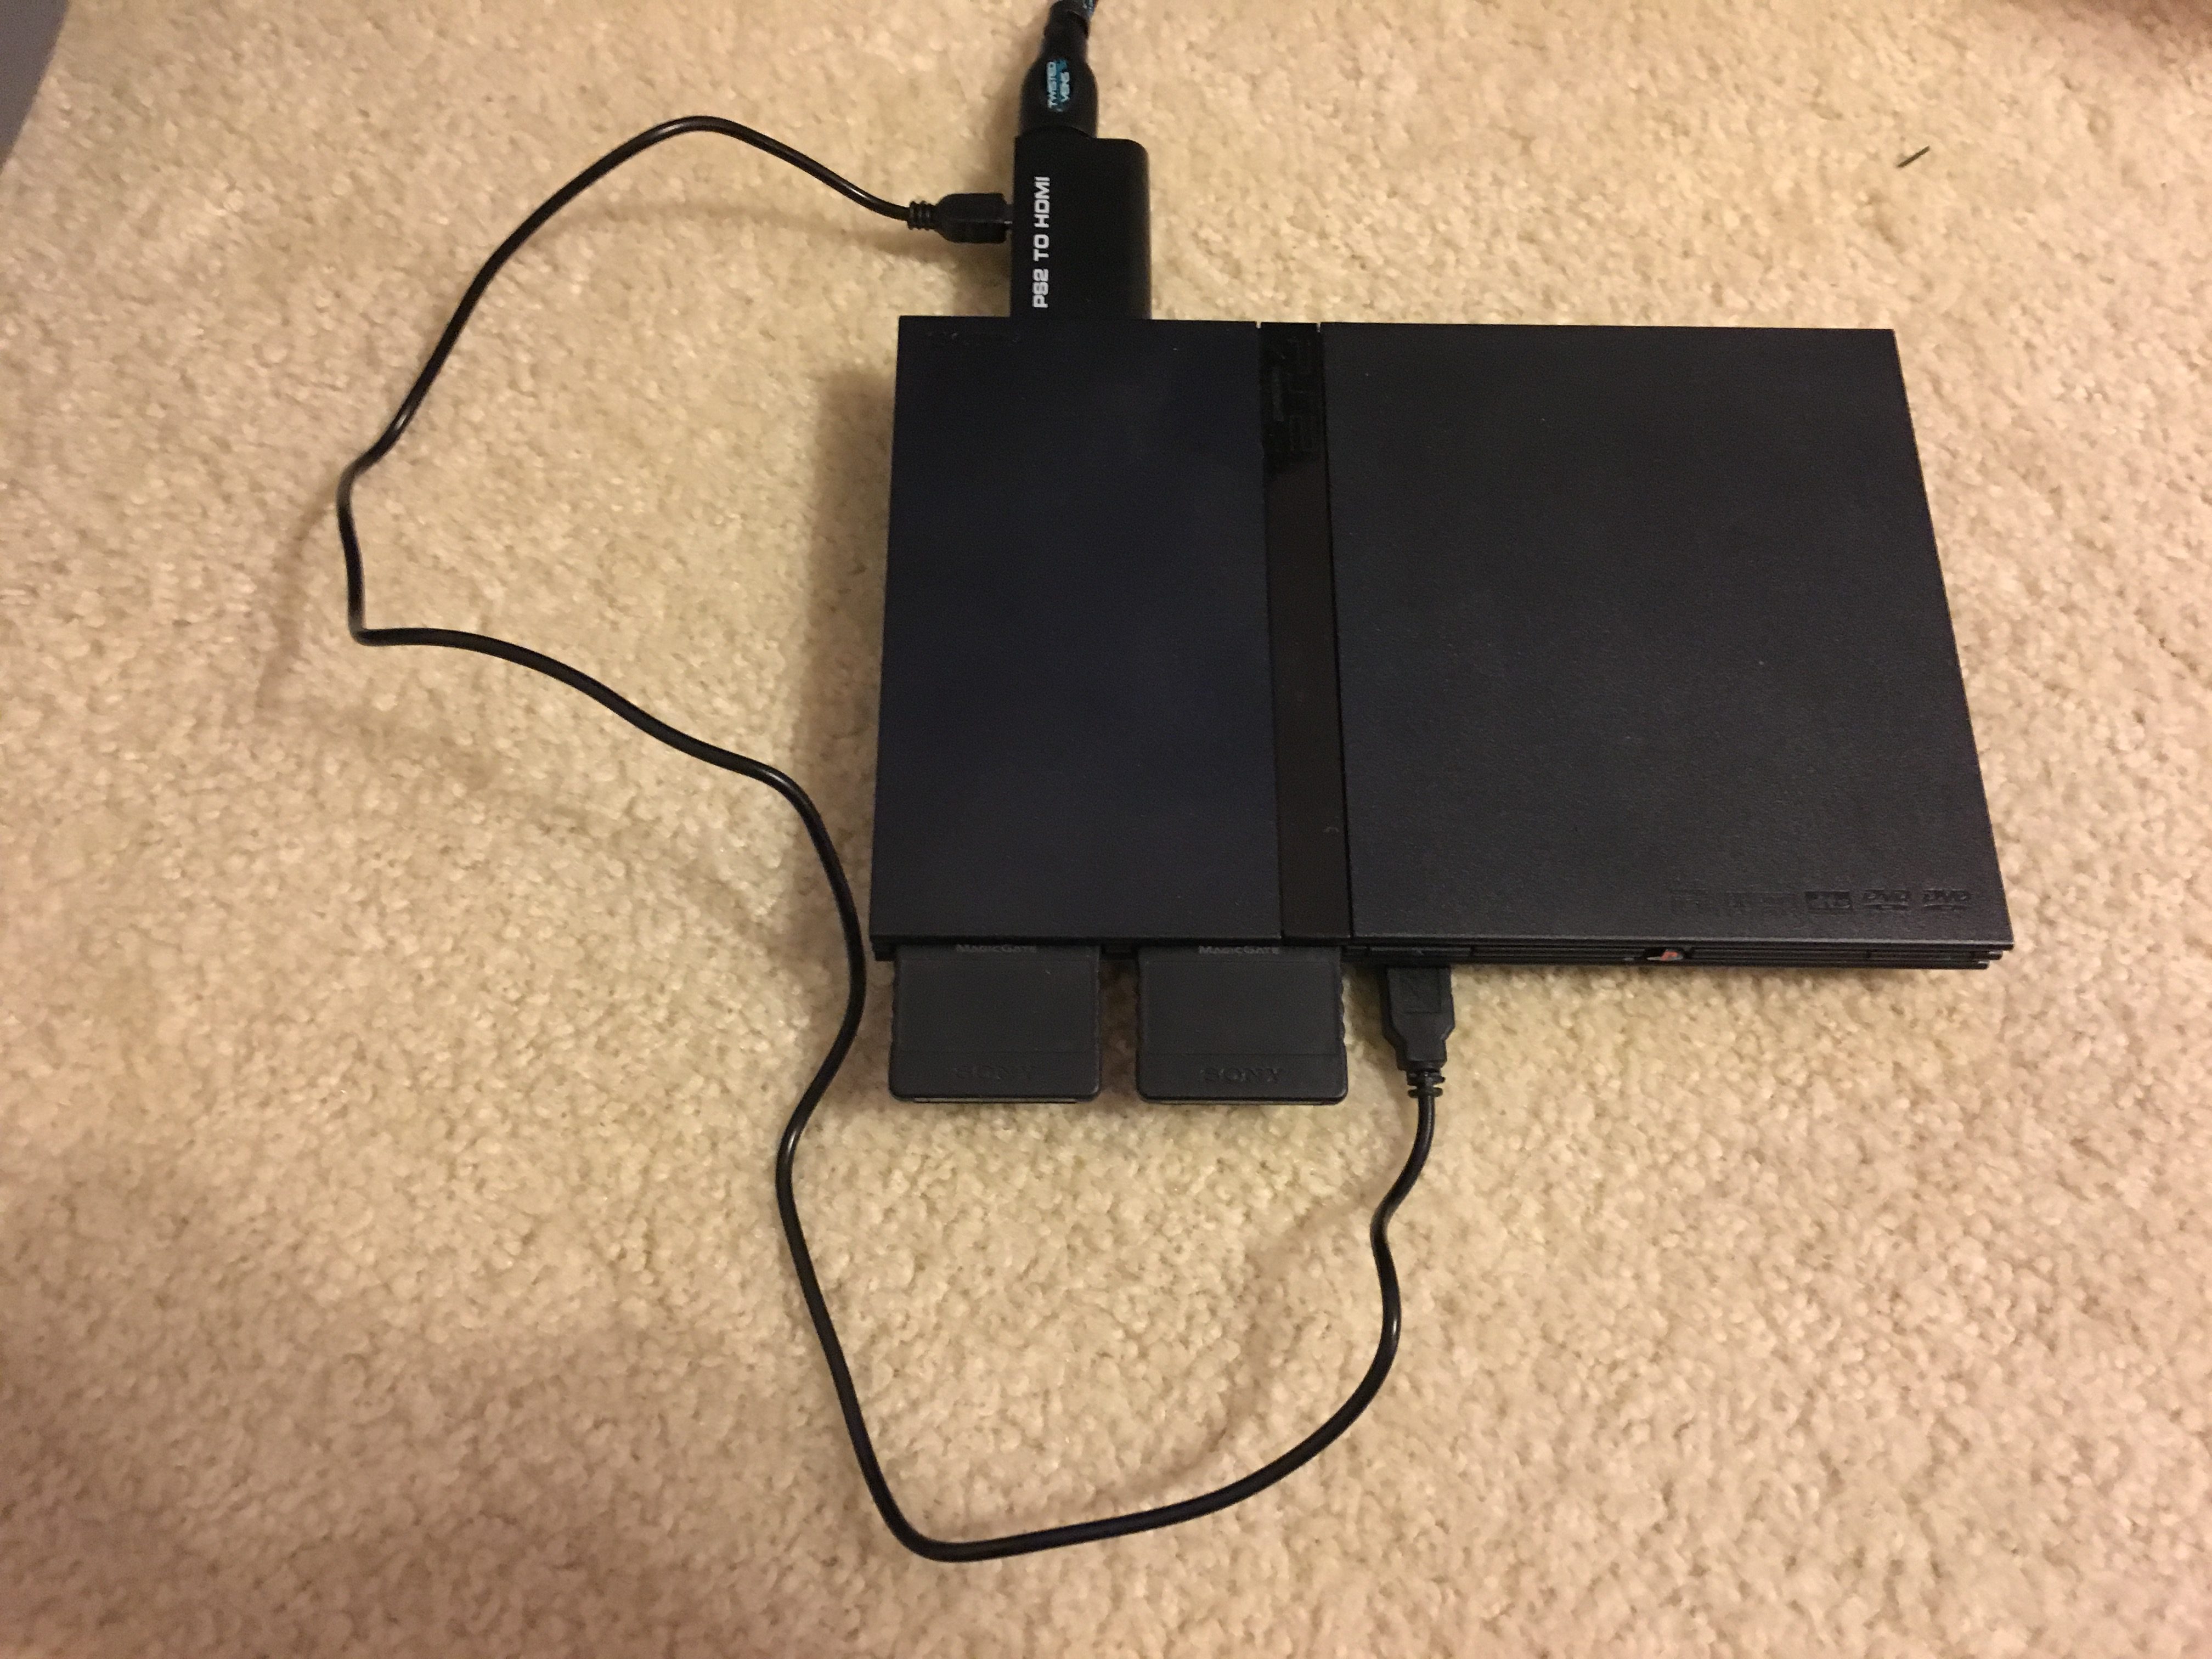 playstation 2 cords needed